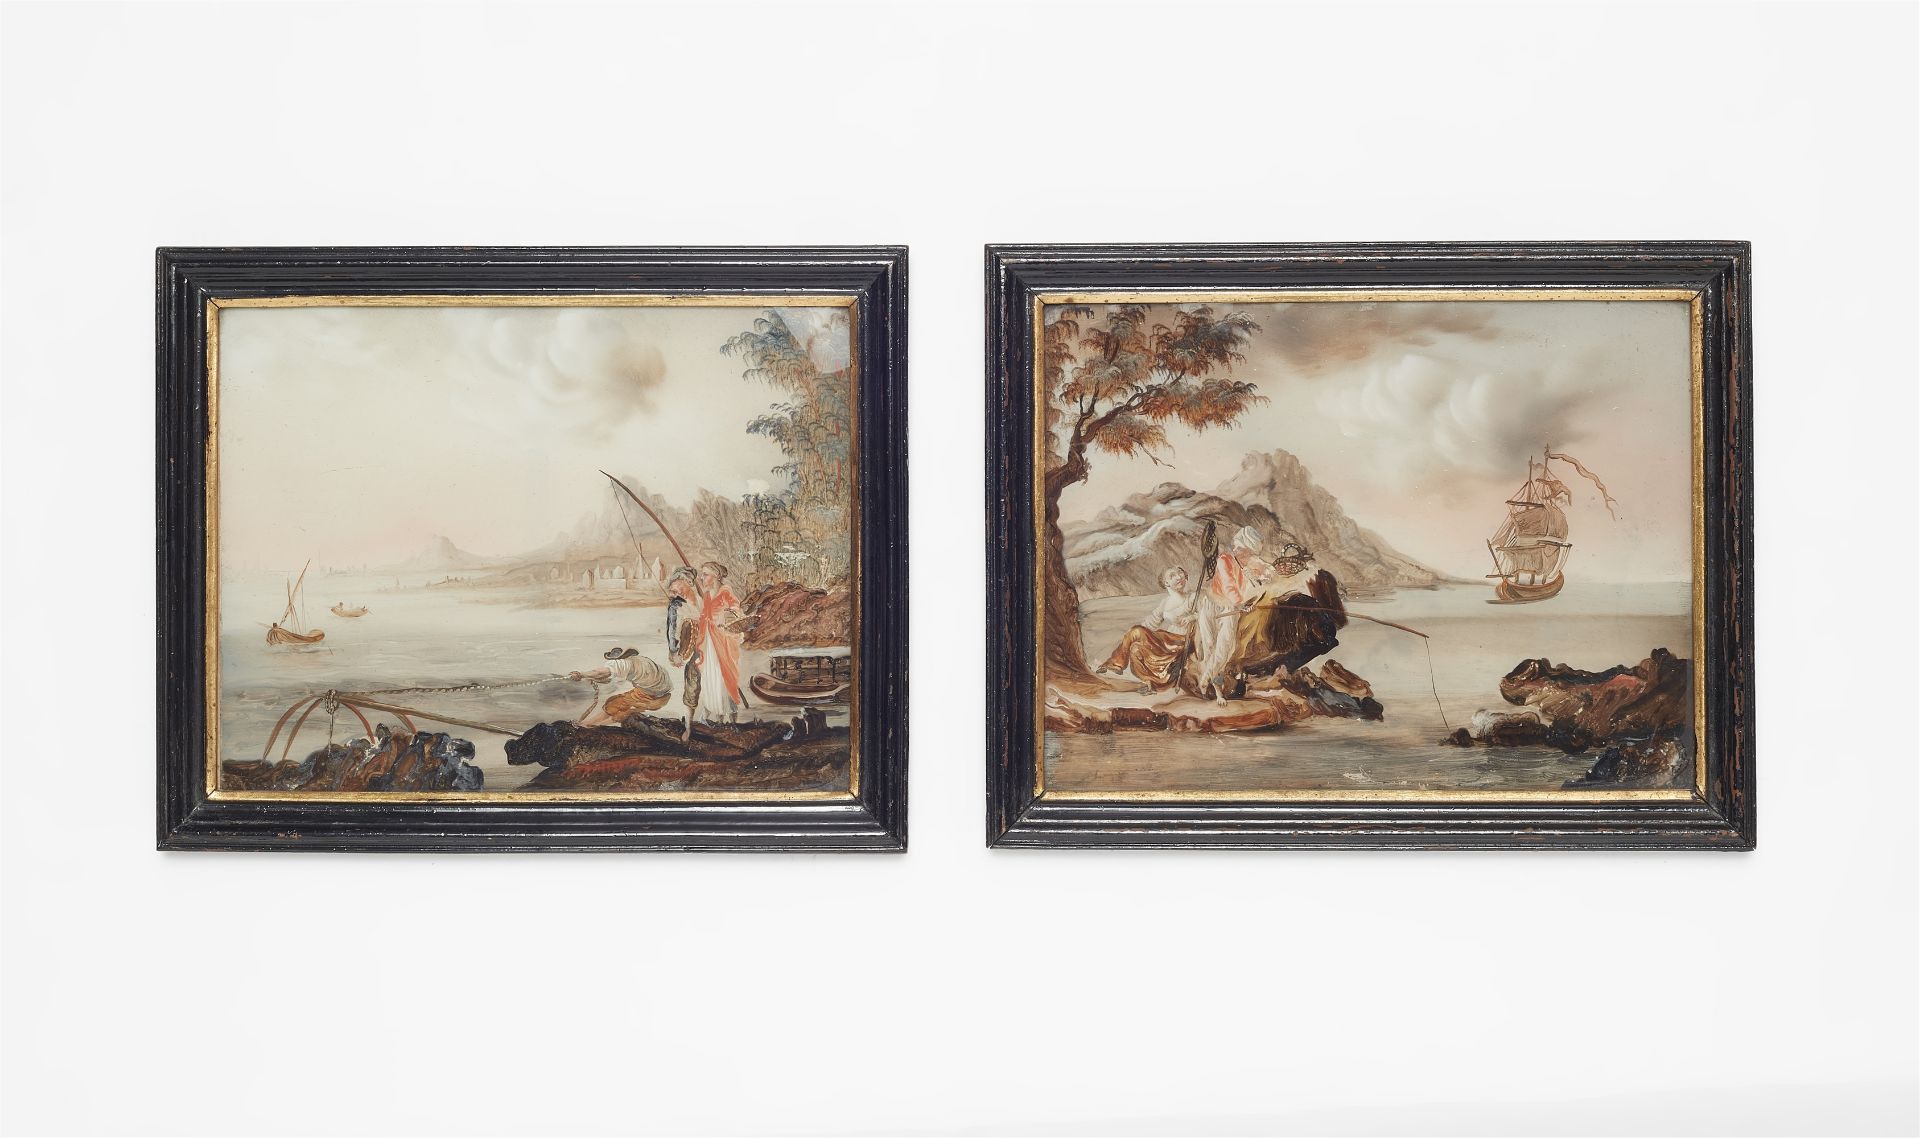 Two Augsburg reverse glass paintings